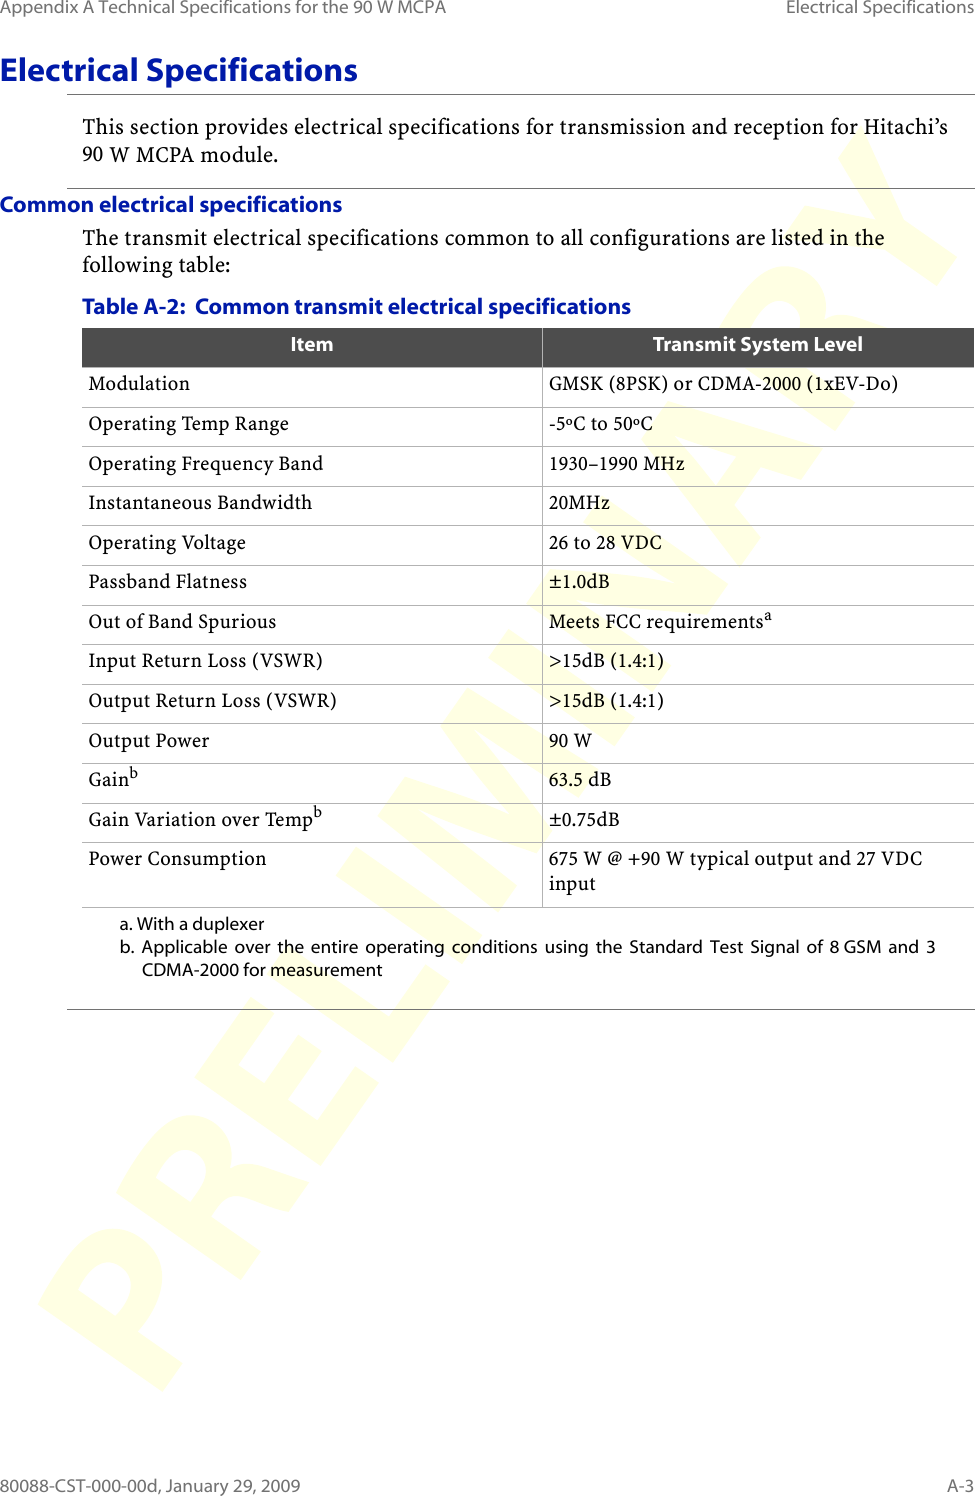 Appendix A Technical Specifications for the 90 W MCPA Electrical Specifications80088-CST-000-00d, January 29, 2009 A-3Electrical SpecificationsThis section provides electrical specifications for transmission and reception for Hitachi’s 90 W MCPA module.Common electrical specificationsThe transmit electrical specifications common to all configurations are listed in the following table:Table A-2:  Common transmit electrical specifications  Item Transmit System LevelModulation GMSK (8PSK) or CDMA-2000 (1xEV-Do)Operating Temp Range -5ºC to 50ºCOperating Frequency Band 1930–1990 MHzInstantaneous Bandwidth 20MHzOperating Voltage 26 to 28 VDCPassband Flatness ±1.0dBOut of Band Spurious Meets FCC requirementsaa. With a duplexerInput Return Loss (VSWR) &gt;15dB (1.4:1)Output Return Loss (VSWR) &gt;15dB (1.4:1)Output Power 90 WGainbb. Applicable over the entire operating conditions using the Standard Test Signal of 8 GSM and 3 CDMA-2000 for measurement 63.5 dBGain Variation over Tempb±0.75dBPower Consumption 675 W @ +90 W typical output and 27 VDC input